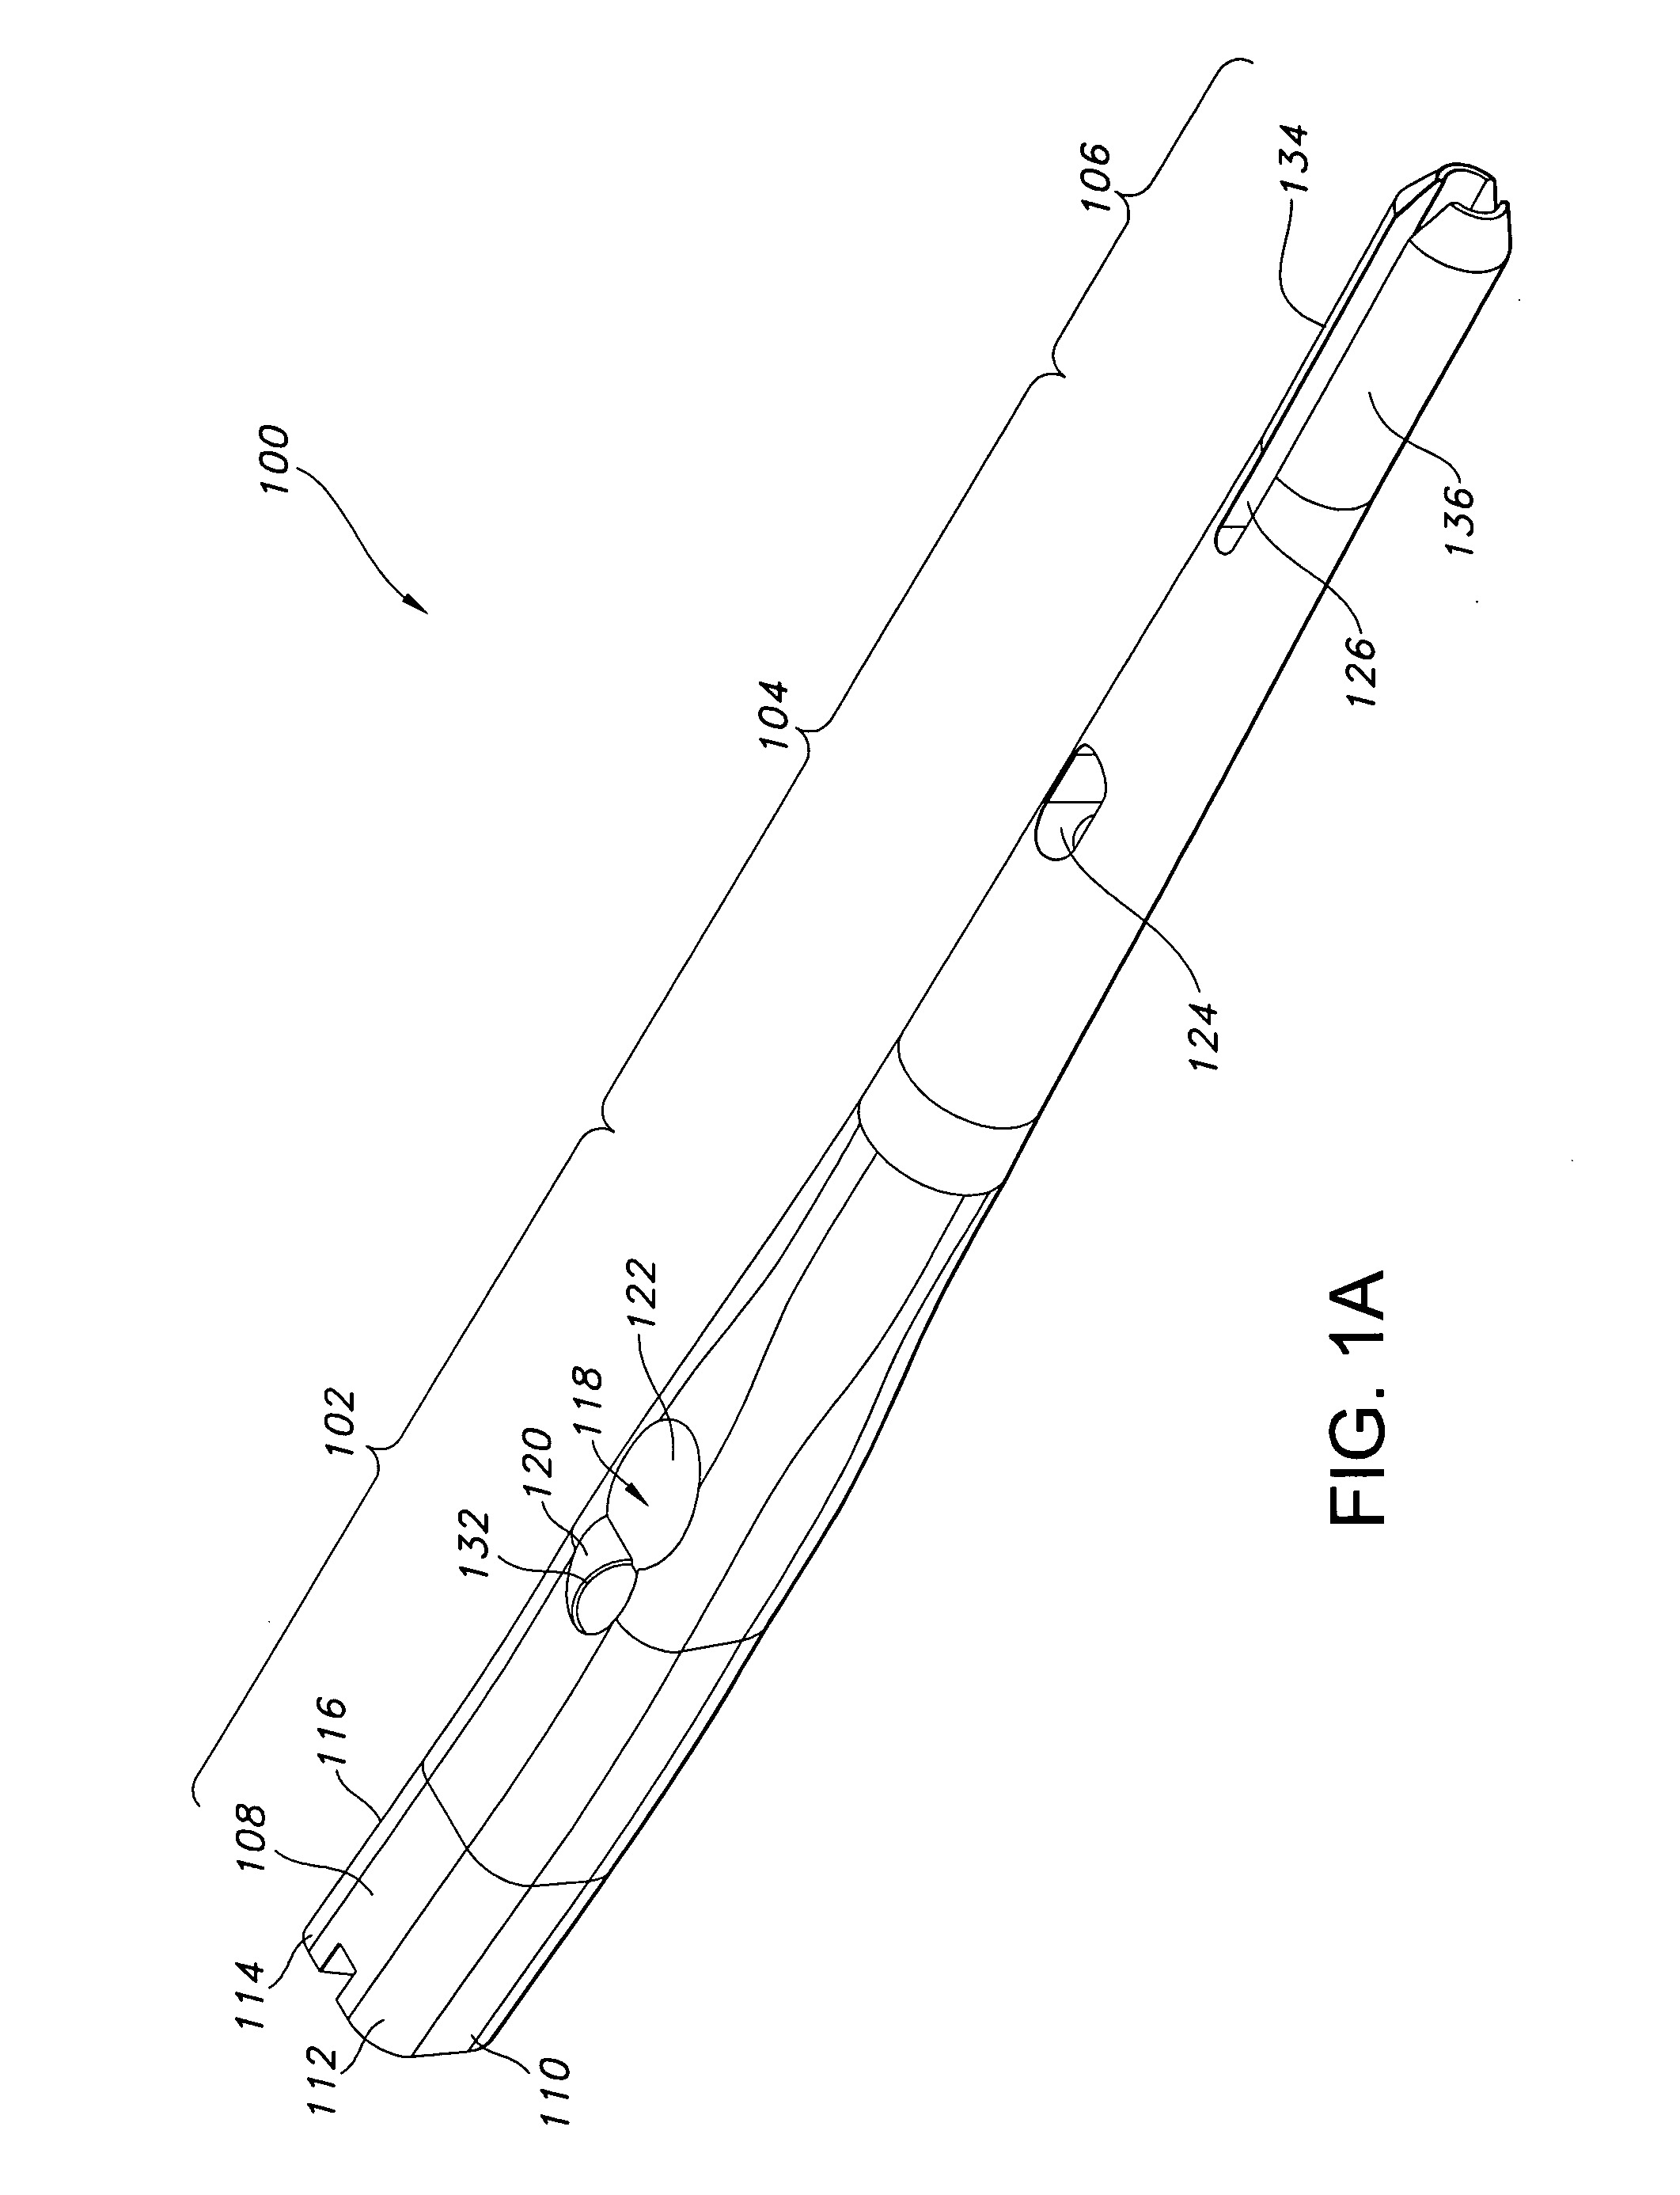 Orthopaedic implant and screw assembly